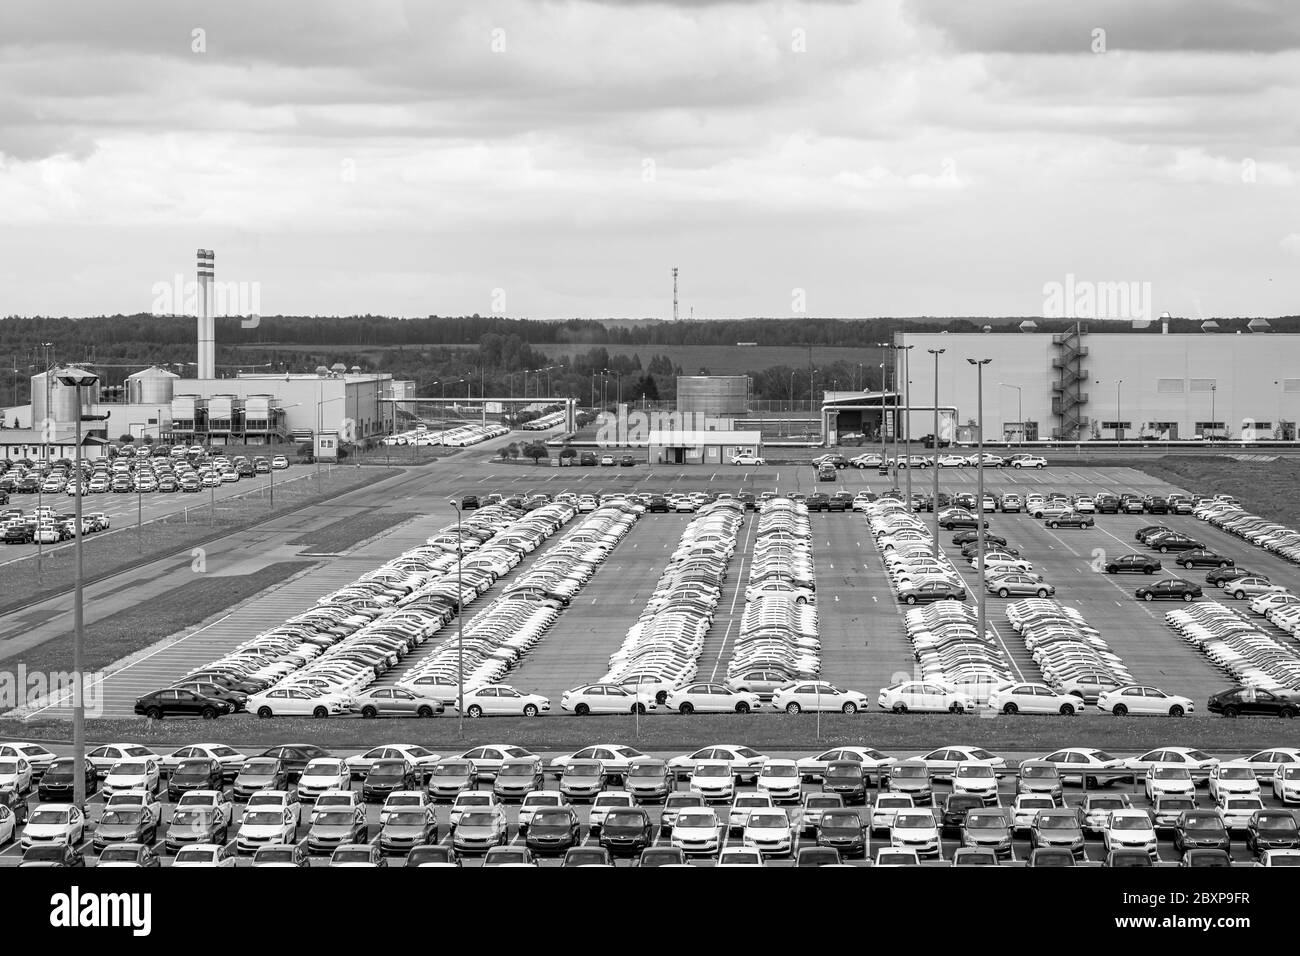 Volkswagen Group Rus, Russia, Kaluga  - MAY 24, 2020: Rows of a new cars parked in a distribution center on a cloudy day in the spring and a car facto Stock Photo